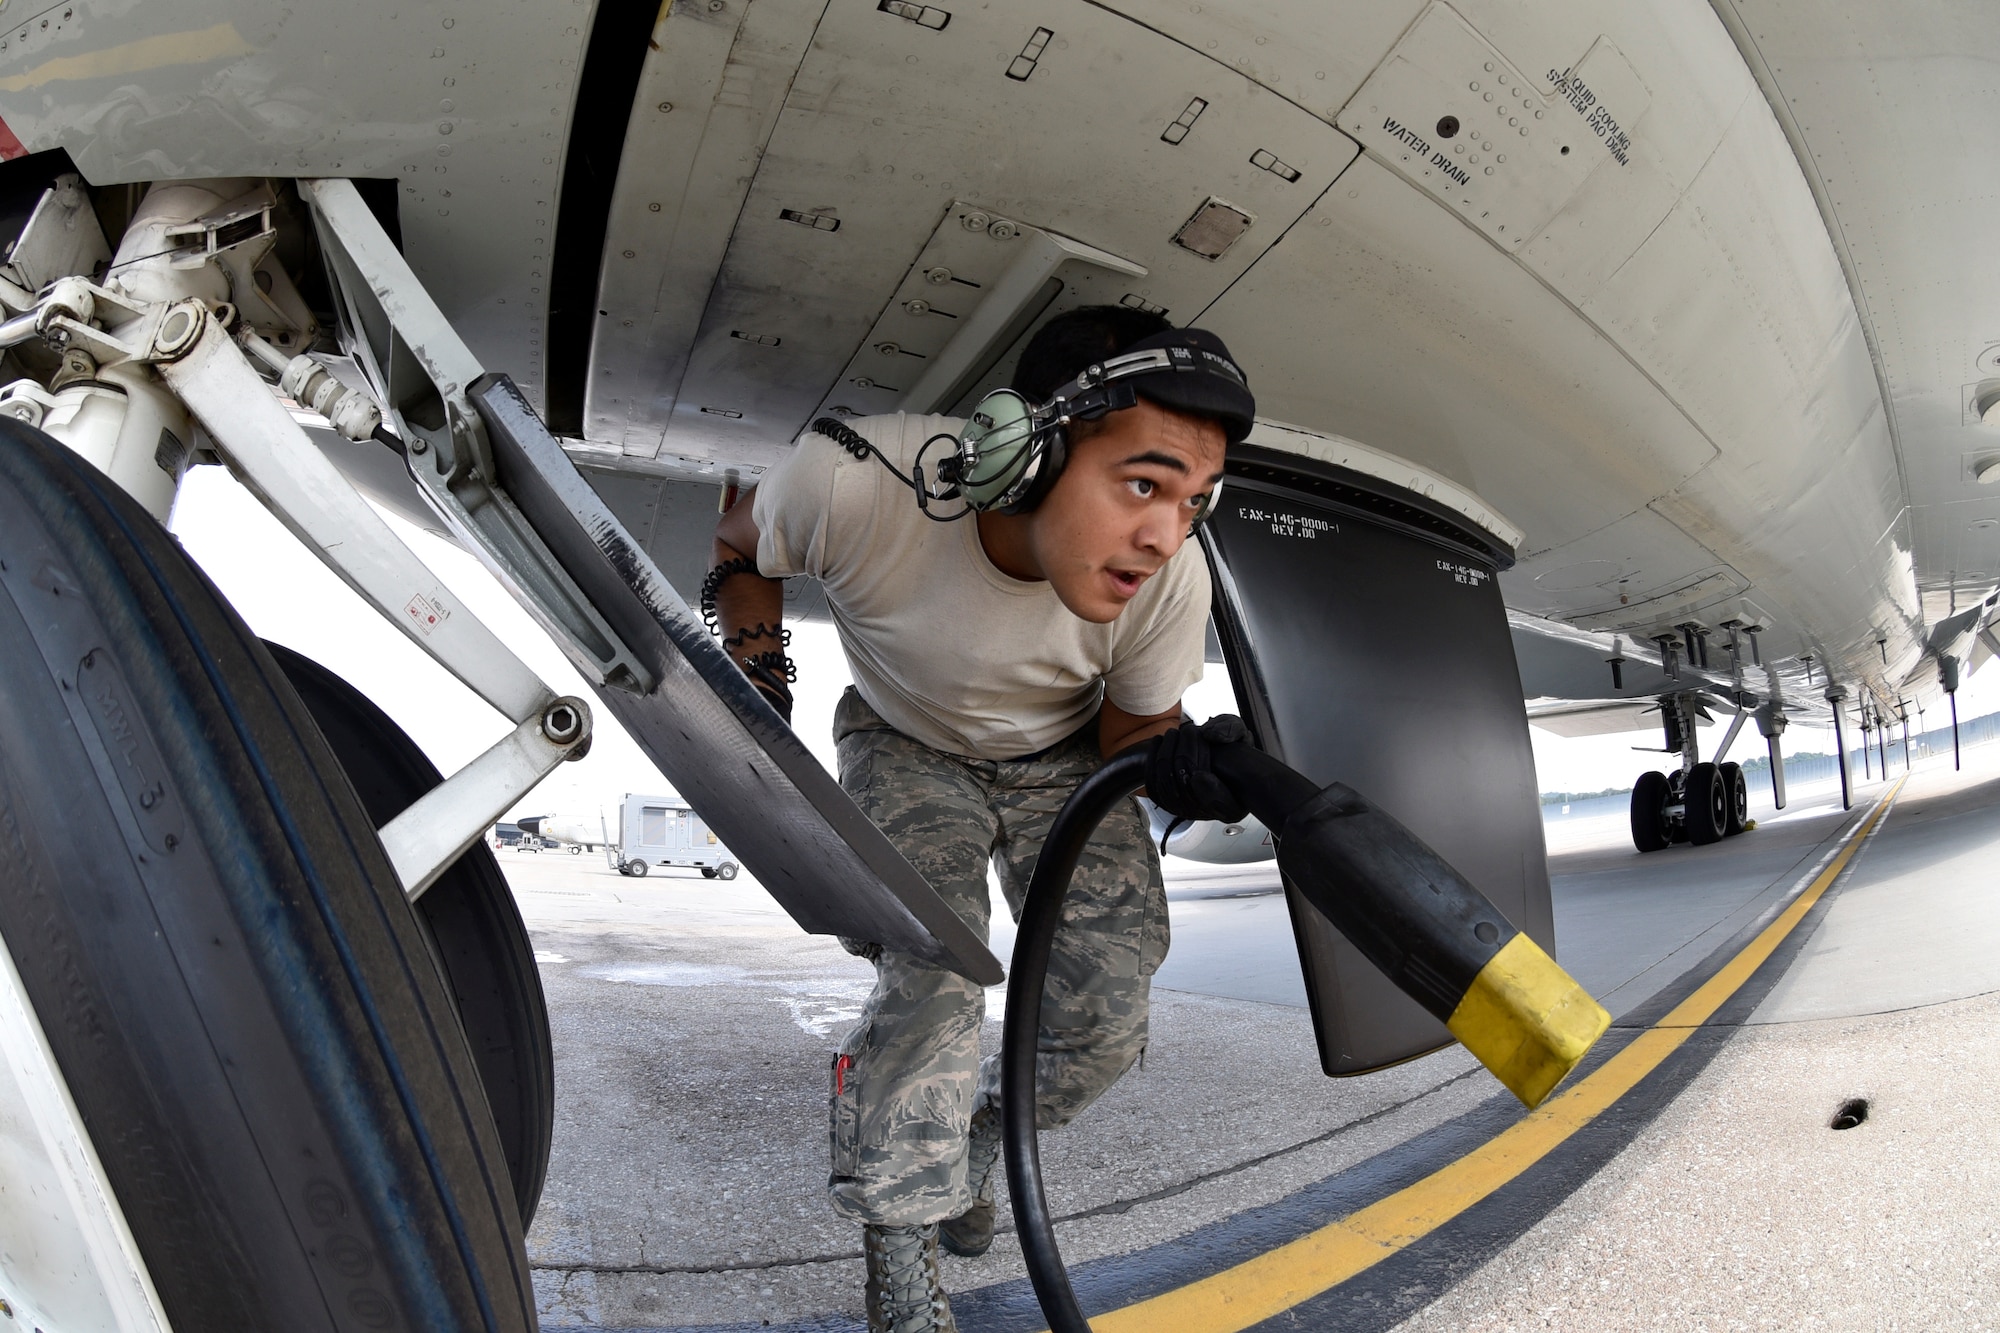 Senior Airman Angel Marroquin, 55th Aircraft Maintenance Squadron, disconnects an external power cord from a RC-135V/W Rivet Joint Aug. 5, 2018 at Offutt Air Force Base, Nebraska. The aircraft is an extensively modified C-135. The Rivet Joint's modifications are primarily related to its on-board sensor suite, which allows the mission-crew to detect, identify and geolocate signals throughout the electromagnetic spectrum. The mission-crew can then forward gathered information in a variety of formats to a wide range of consumers via Rivet Joint's extensive communications suite. (U.S. Air Force photo by 2nd Lt. Drew Nystrom)